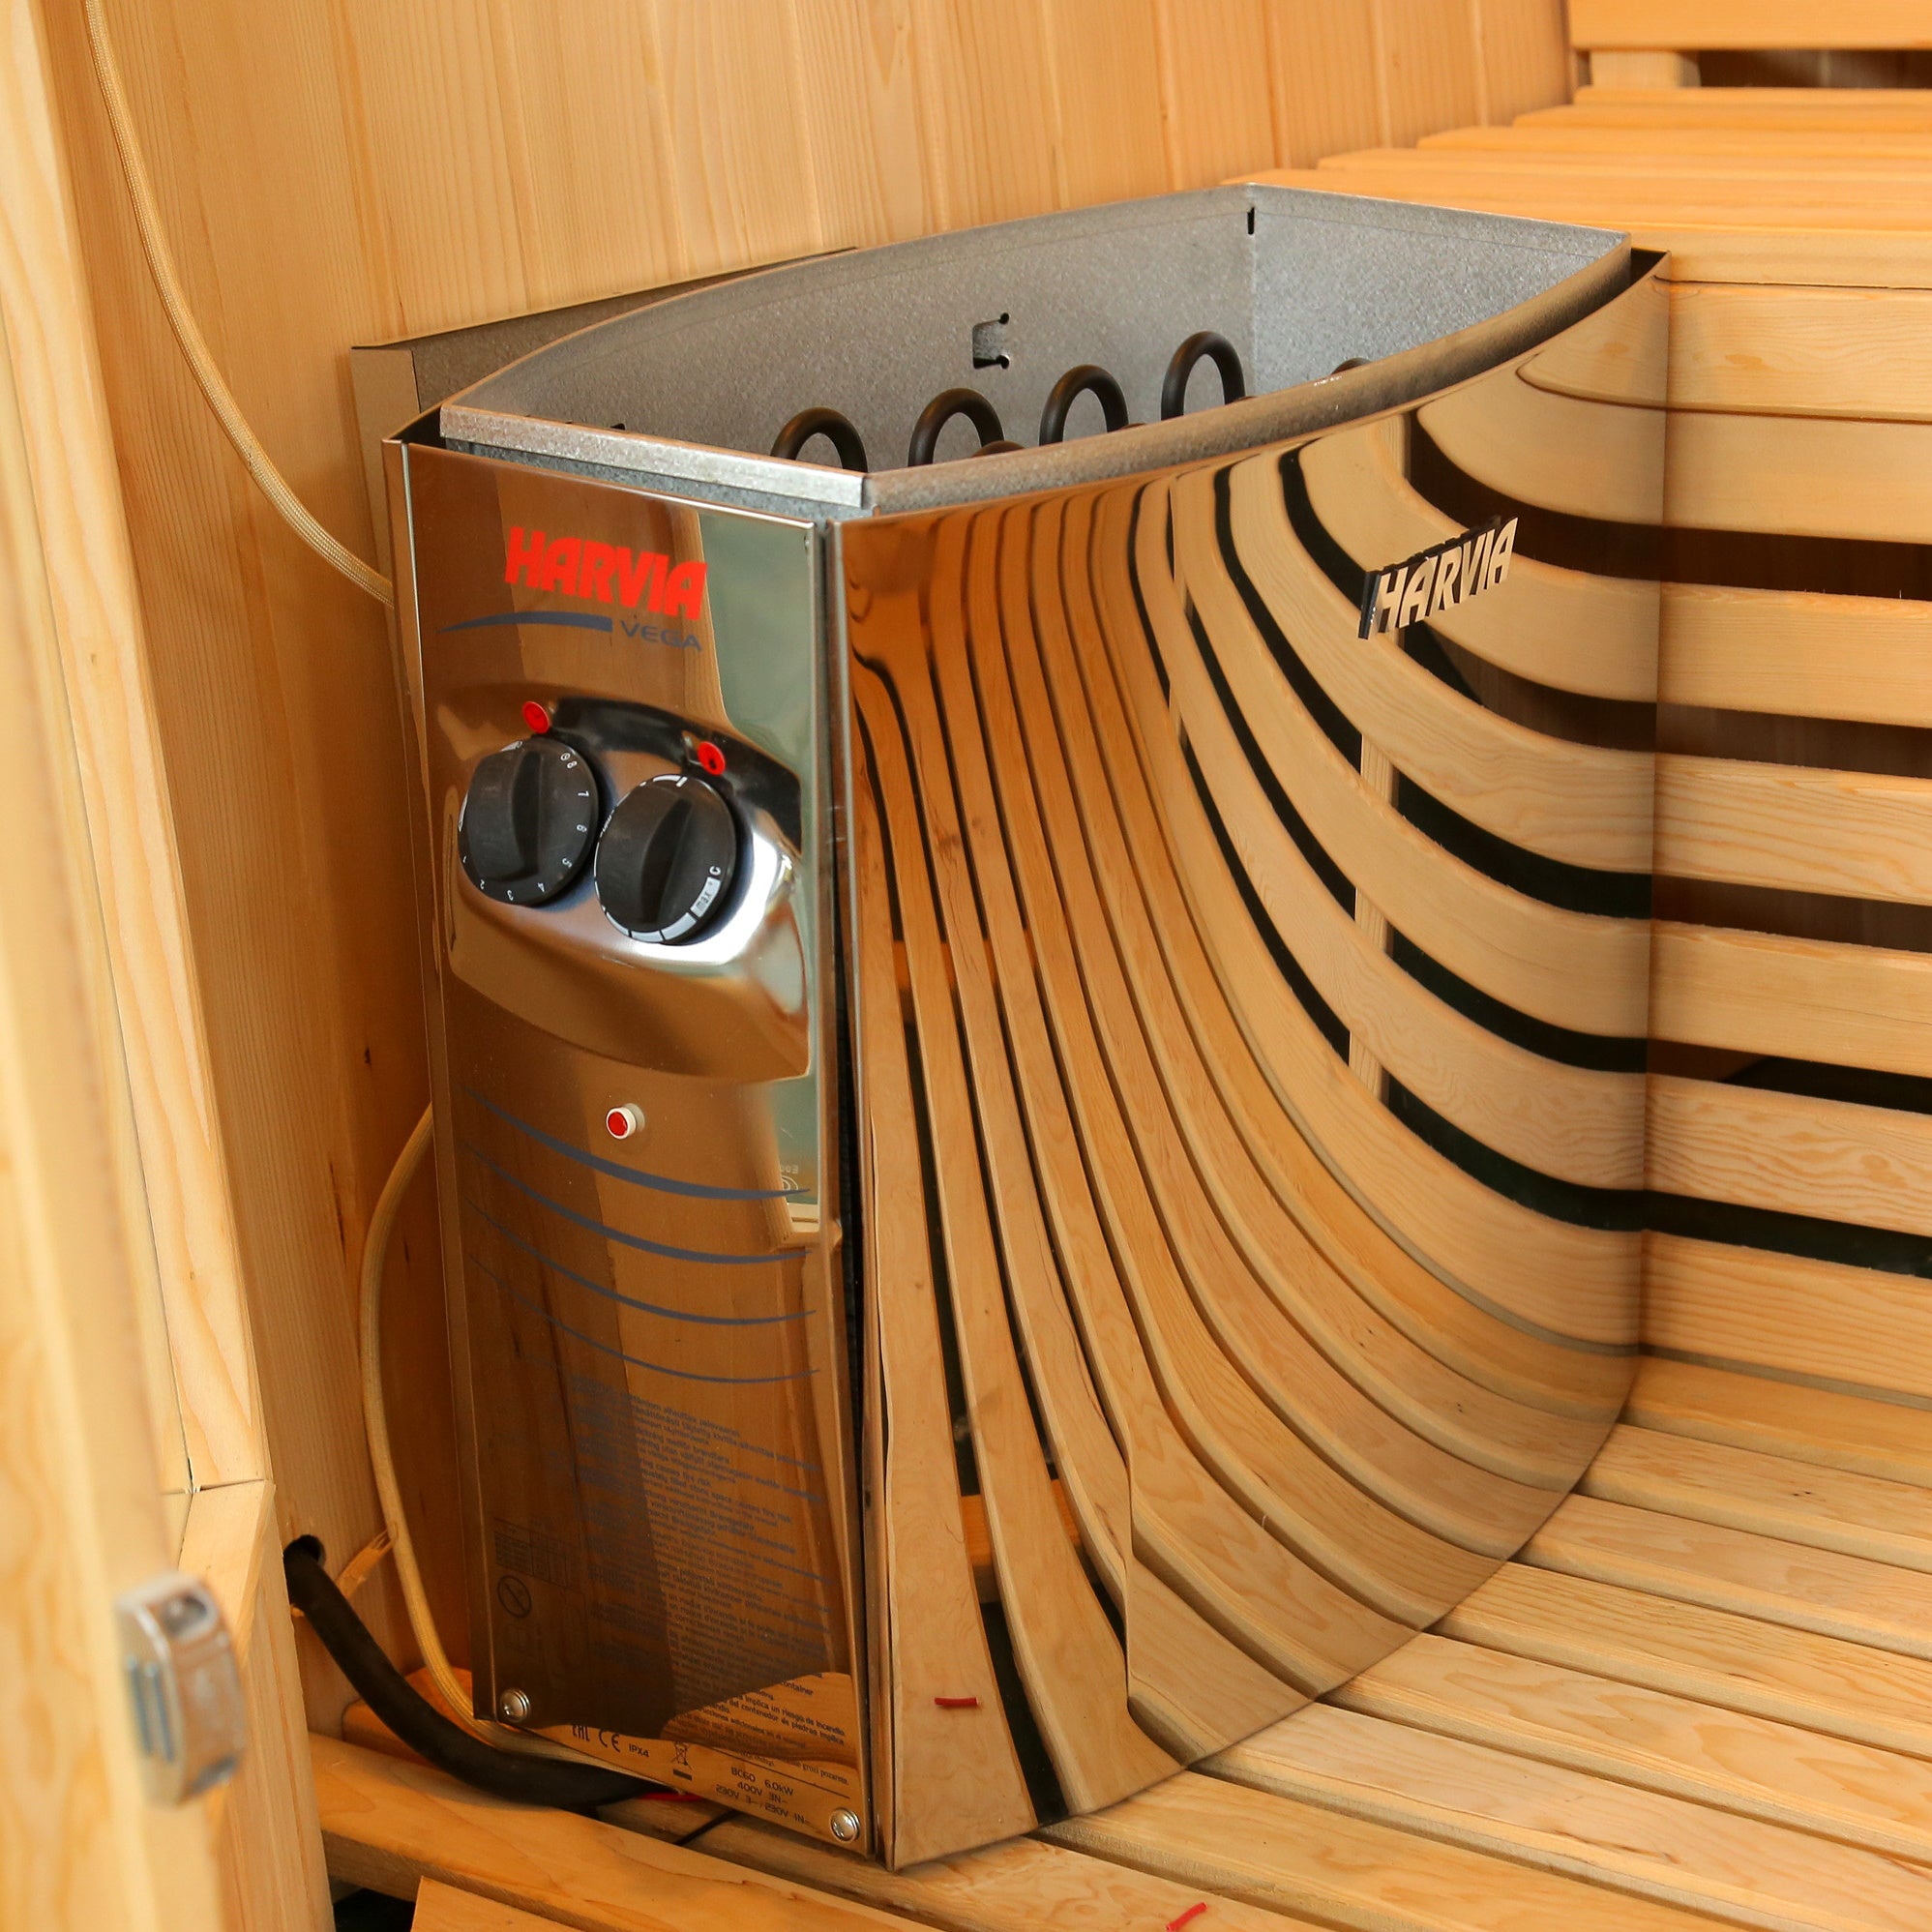 SunRay Sauna Baldwin 2 Person Traditional Sauna - Canadian Hemlock Construction with tempered glass door, Hygrometer/Sand Timer, Cask and Spoon - Isometric view - HL200SN